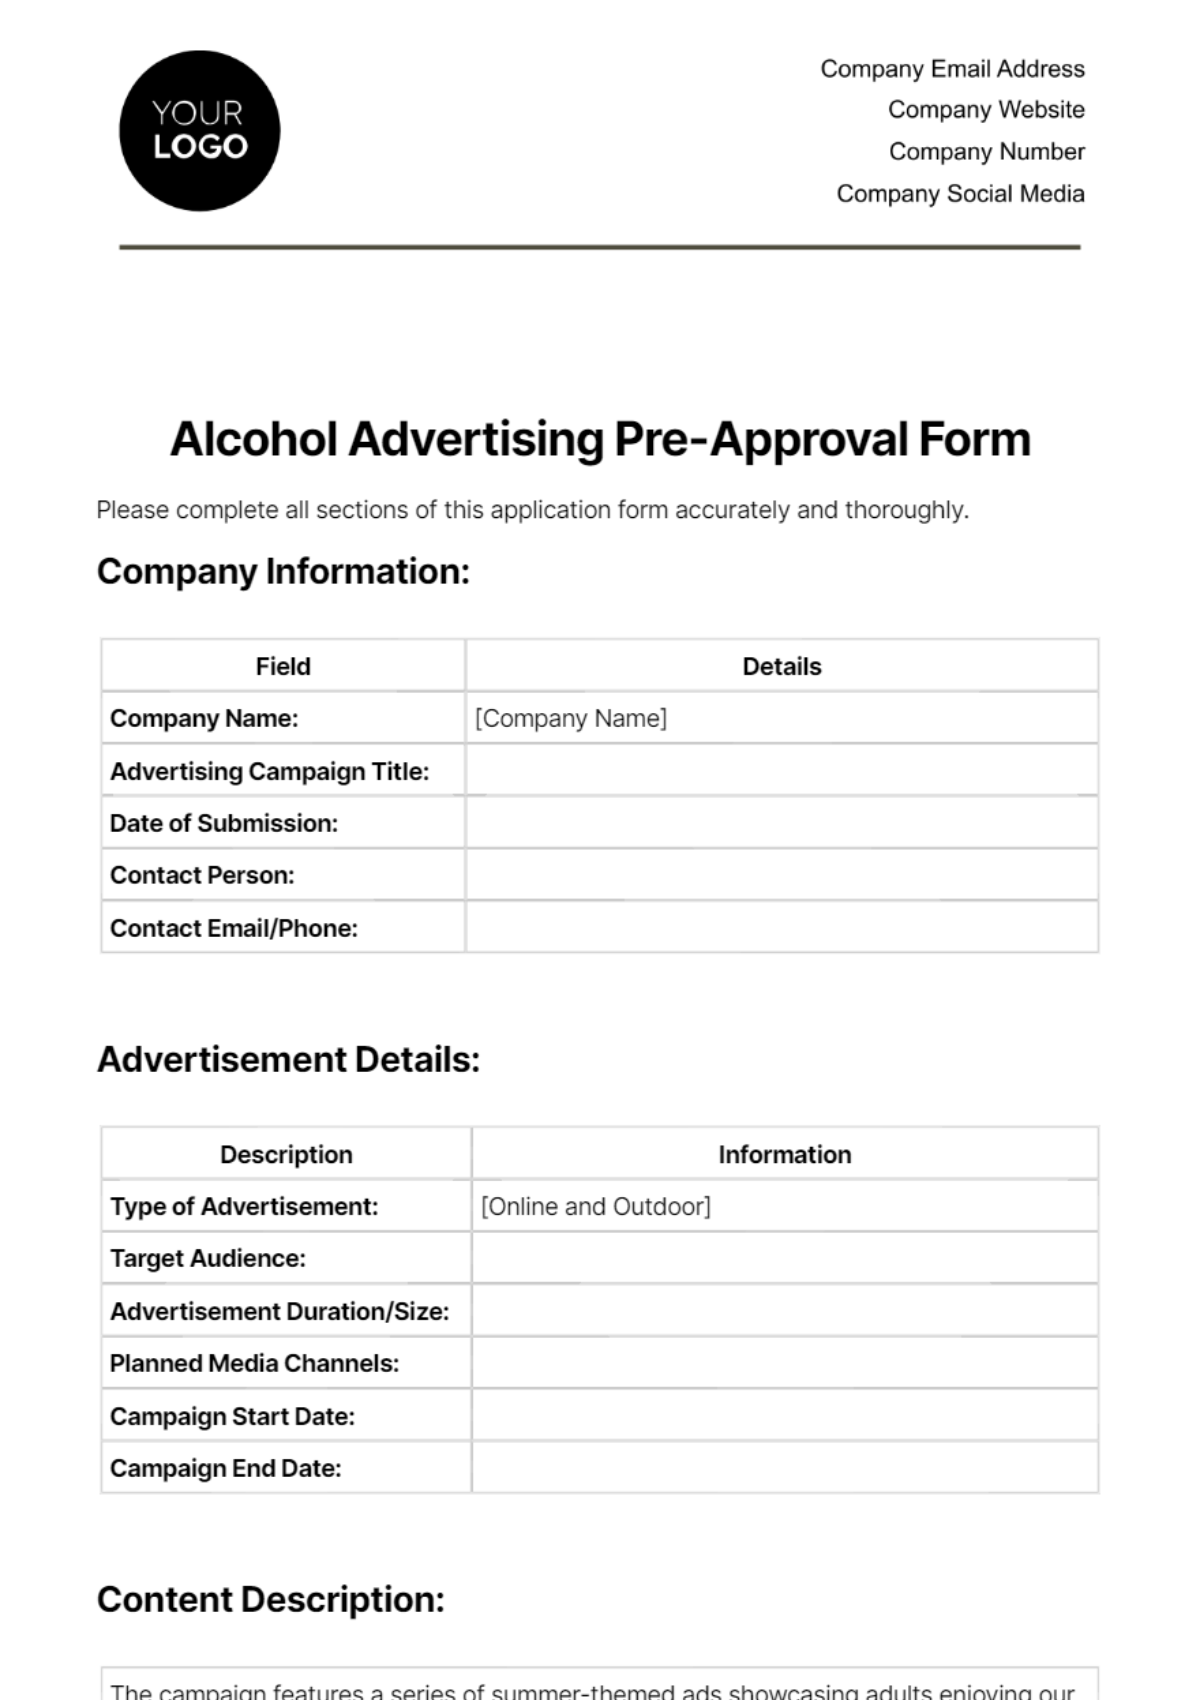 Free Alcohol Advertising Pre-Approval Form Template